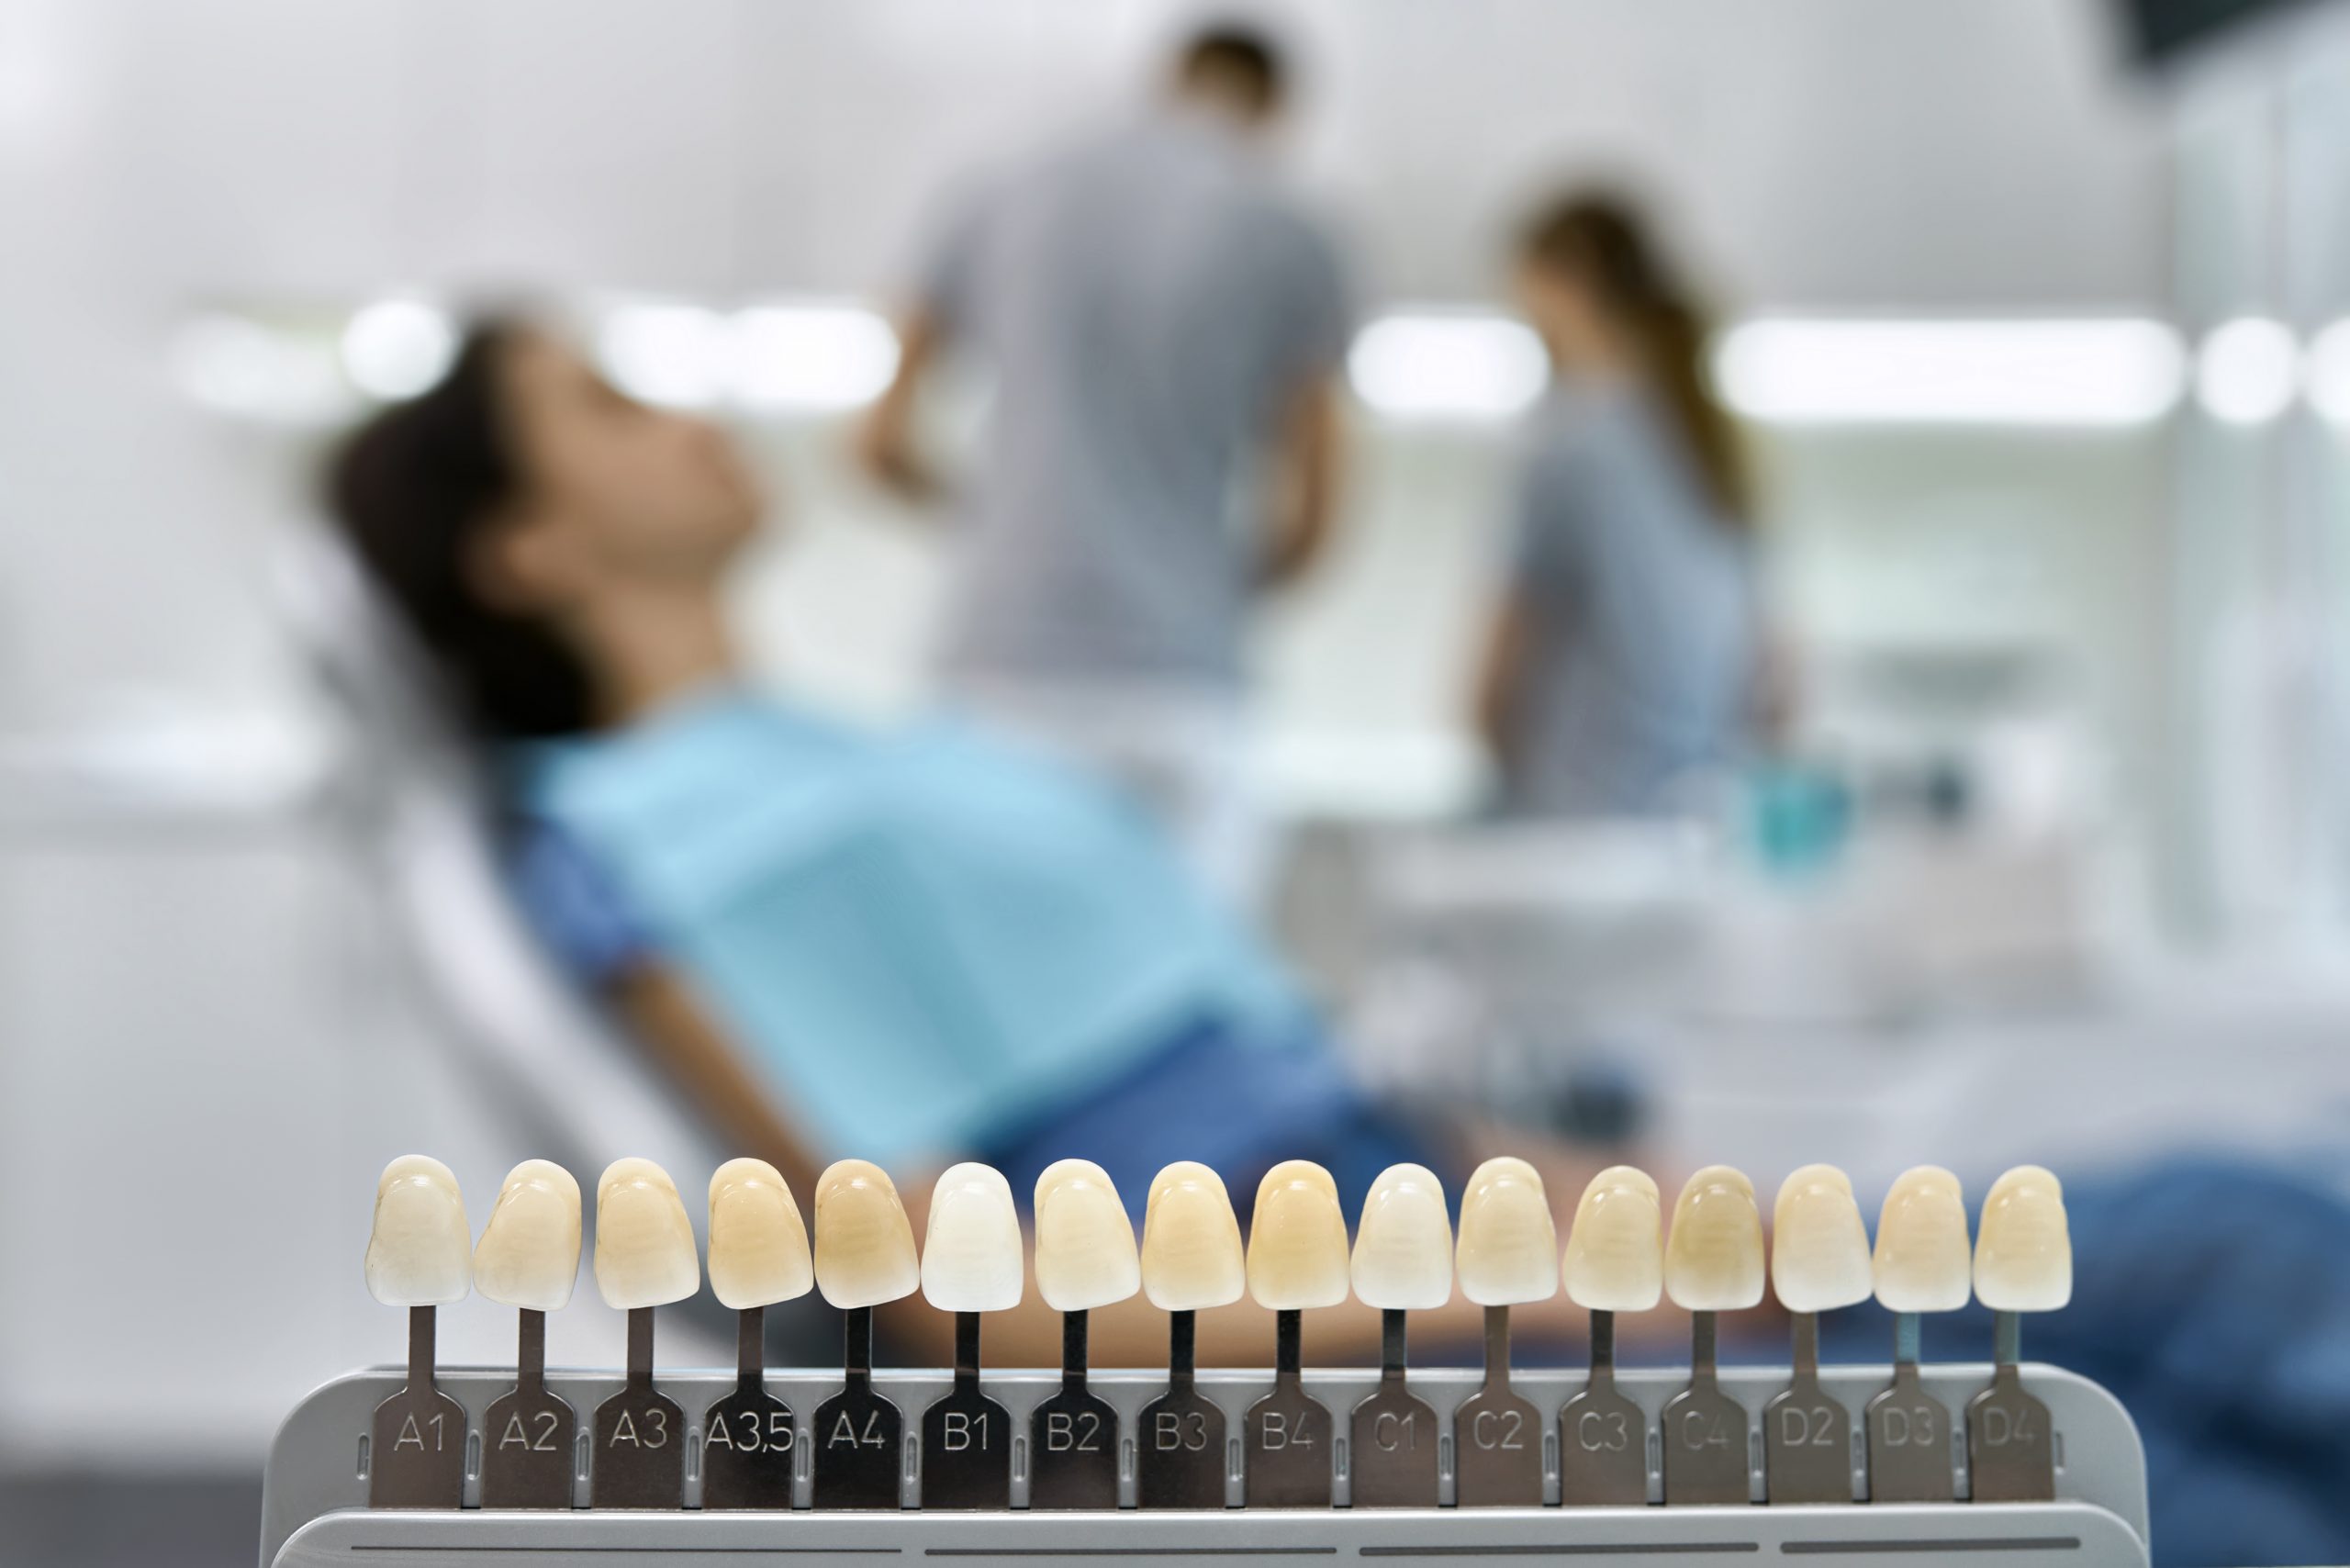 Teeth shade guide on the blurred background of a dental cabinet with patient and dentists